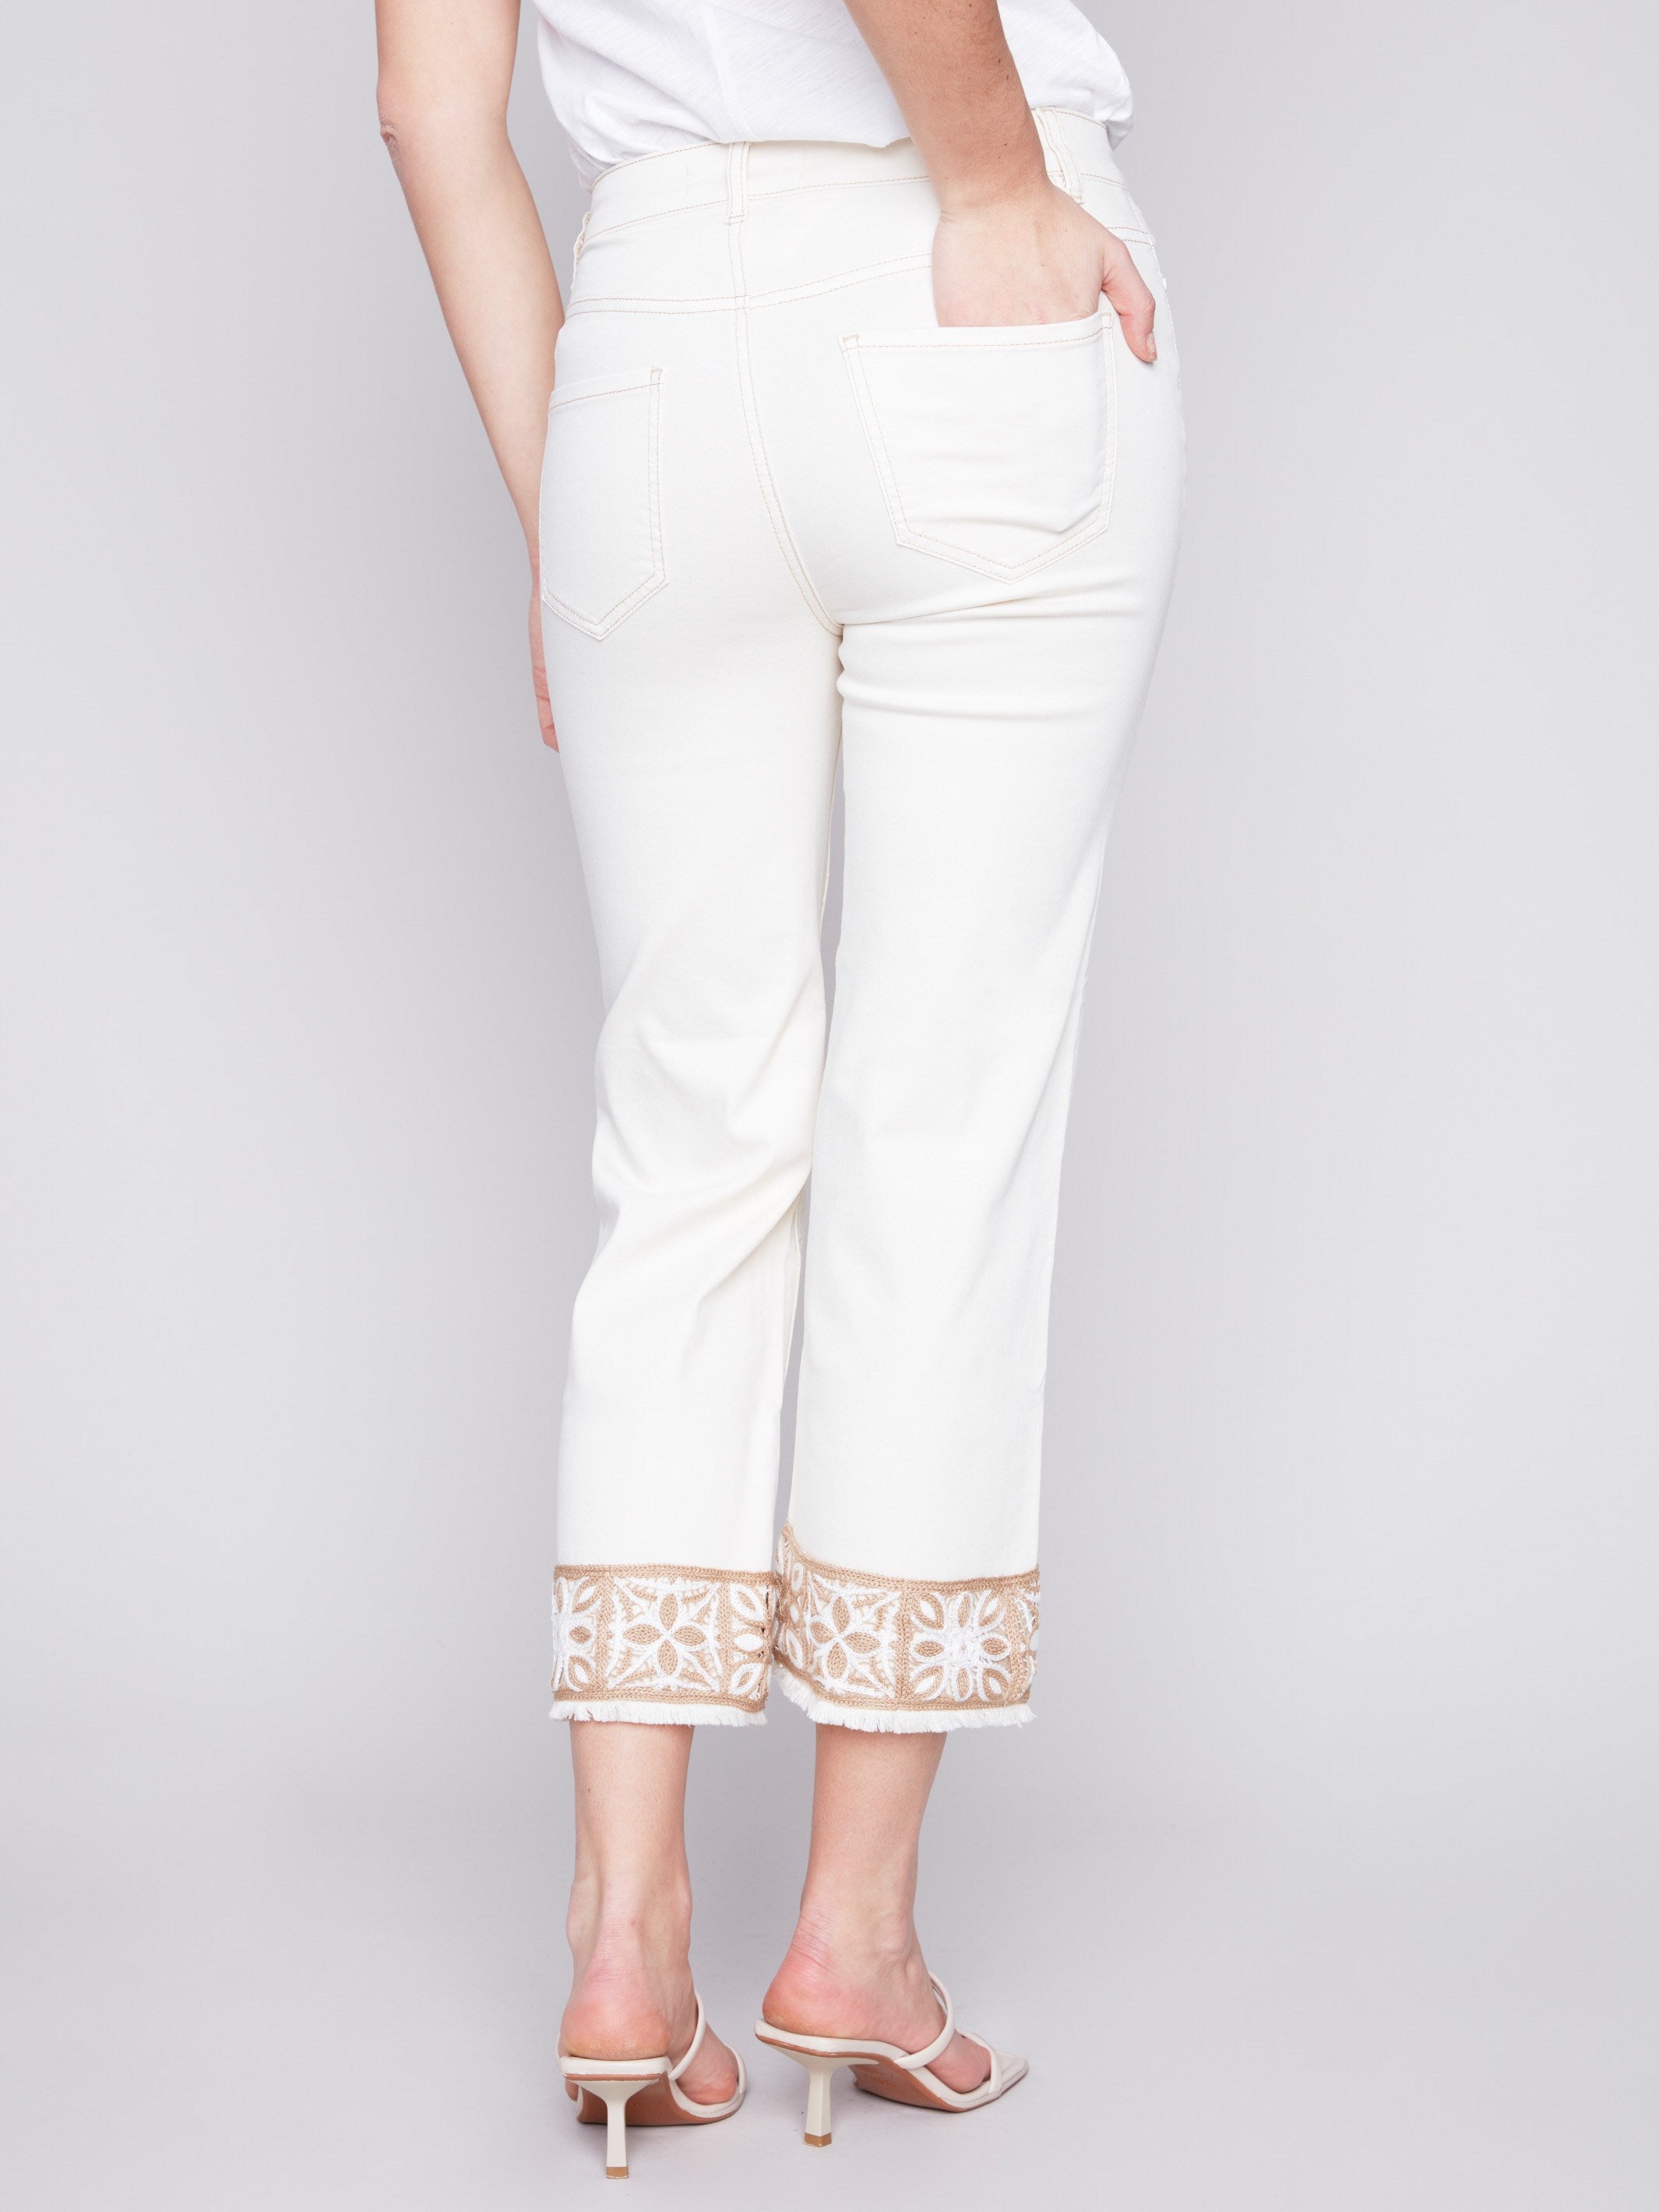 Twill Pants with Crochet Cuff - Natural - Charlie B Collection Canada - Image 3